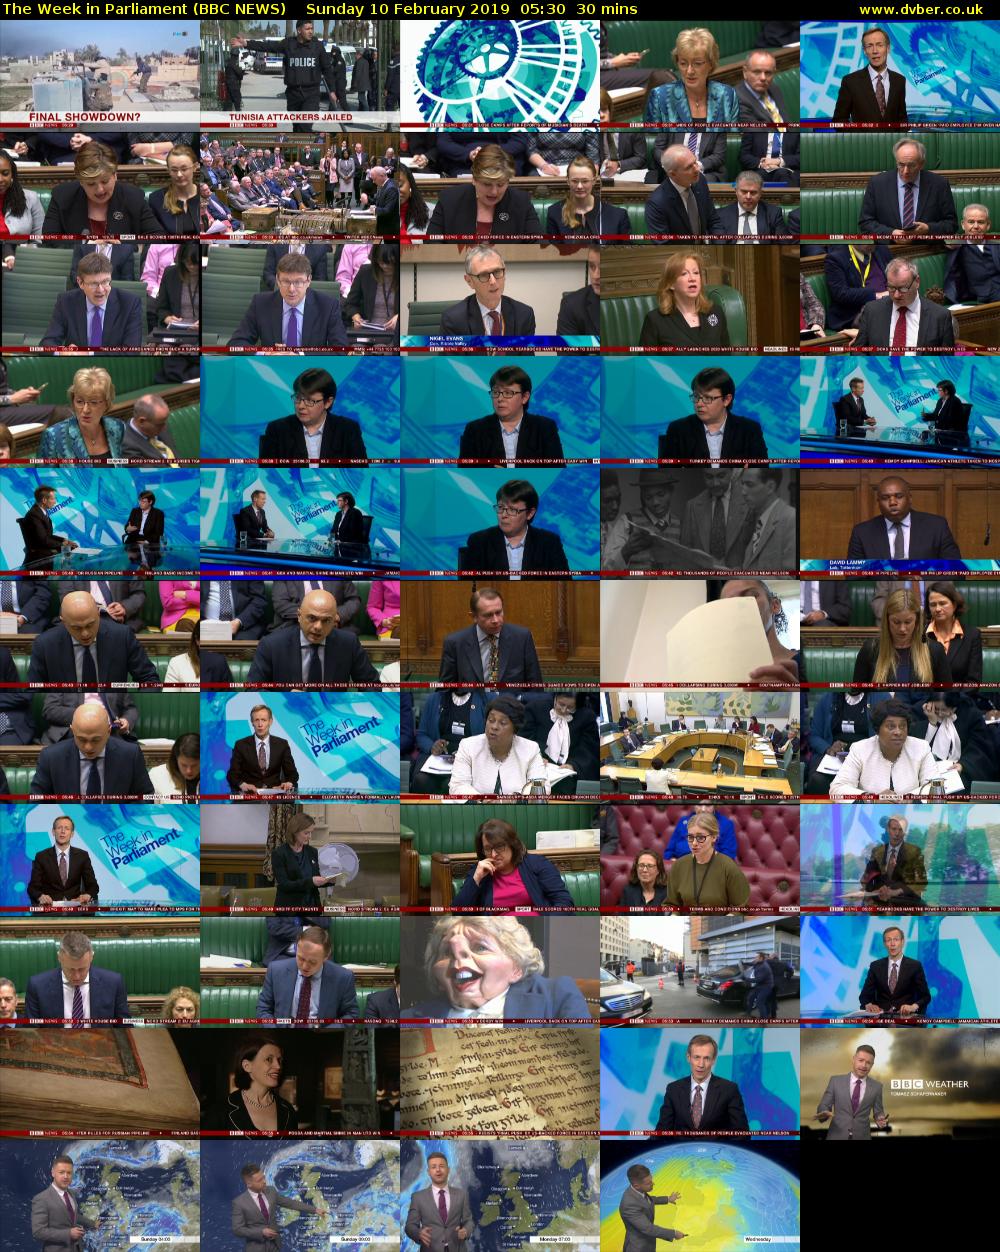 The Week in Parliament (BBC NEWS) Sunday 10 February 2019 05:30 - 06:00